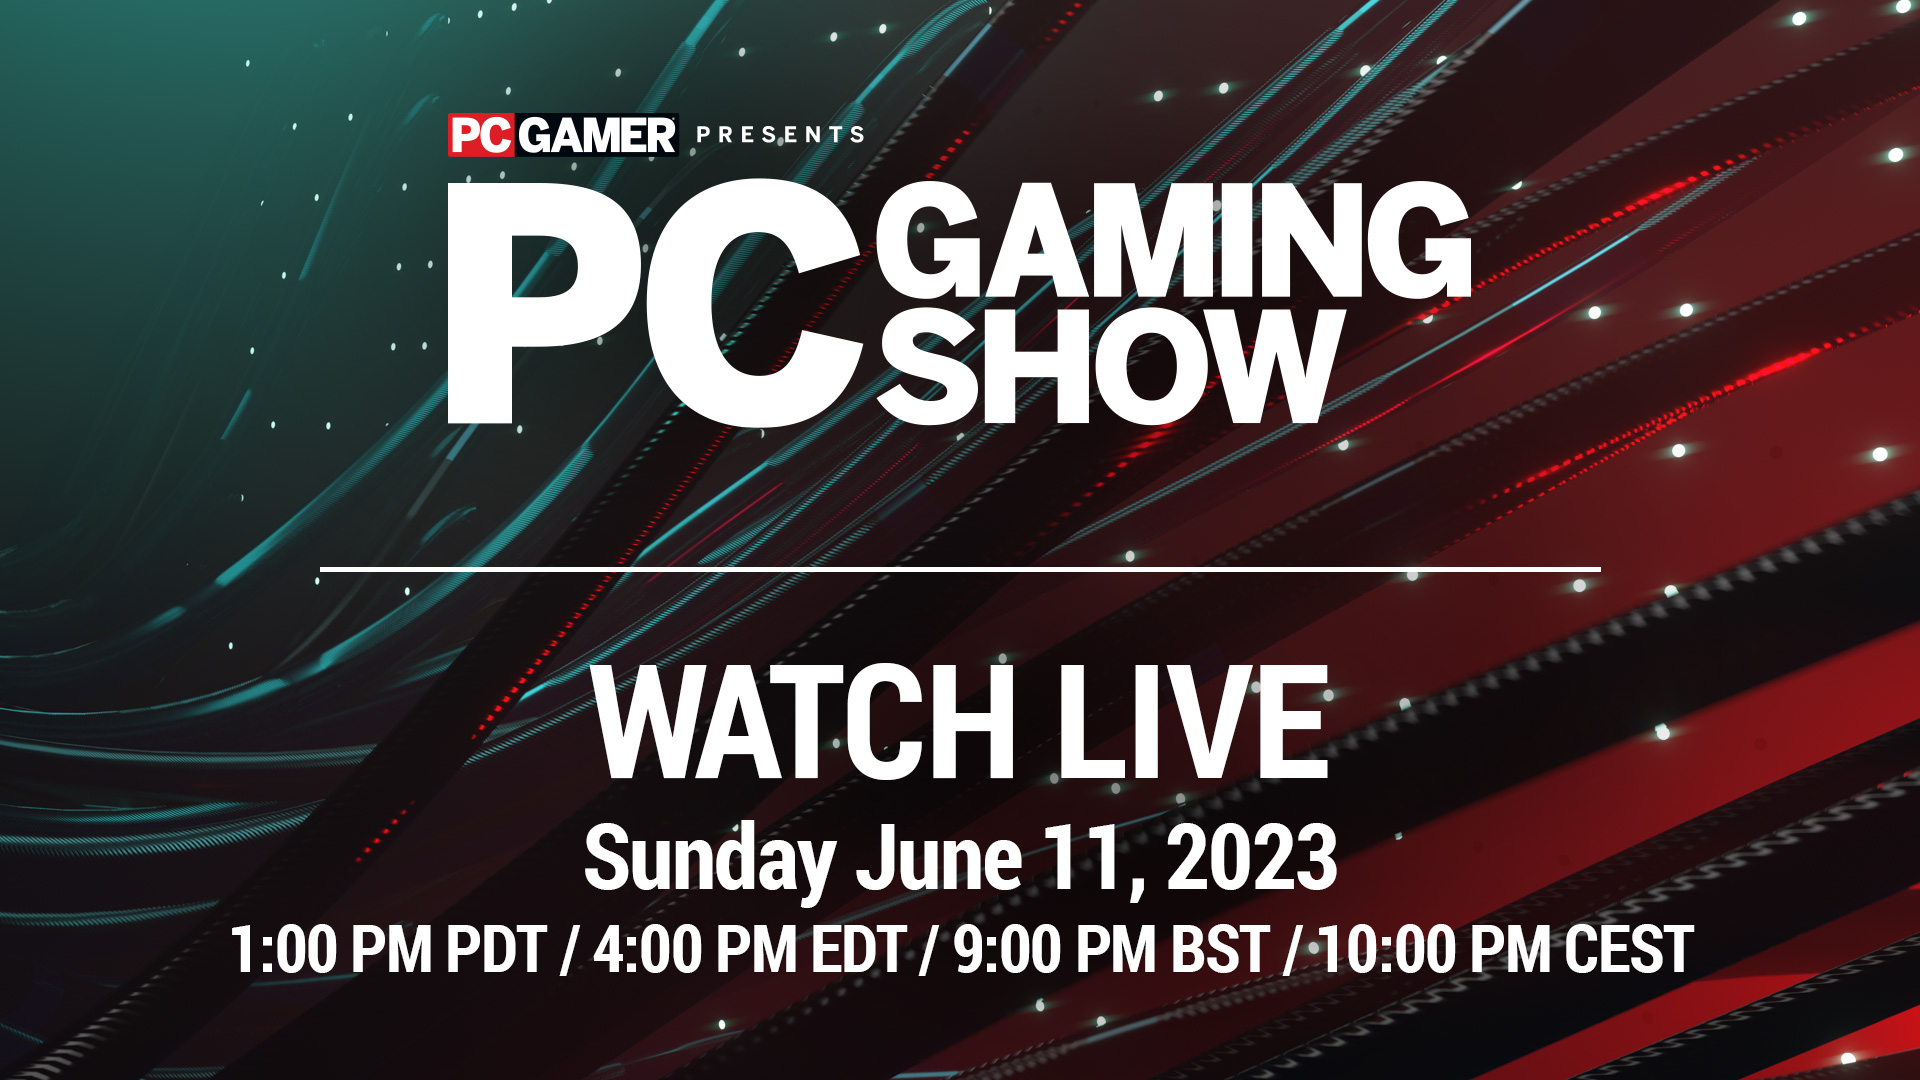 PlayStation Showcase 2023 games that are coming to PC